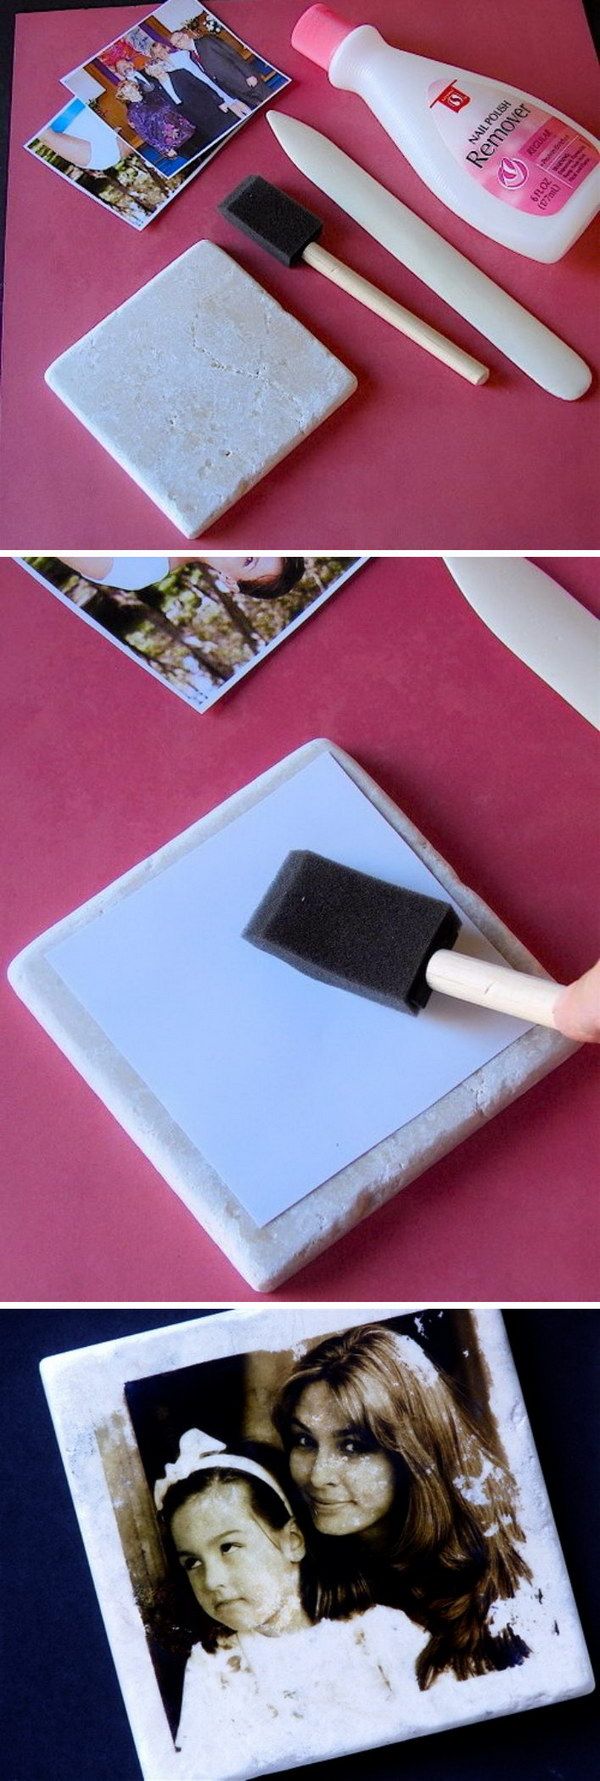 TRANSFER PICTURES TO TILES BY USING NAIL POLISH REMOVER -   Ideas for Photo Transfer Projects